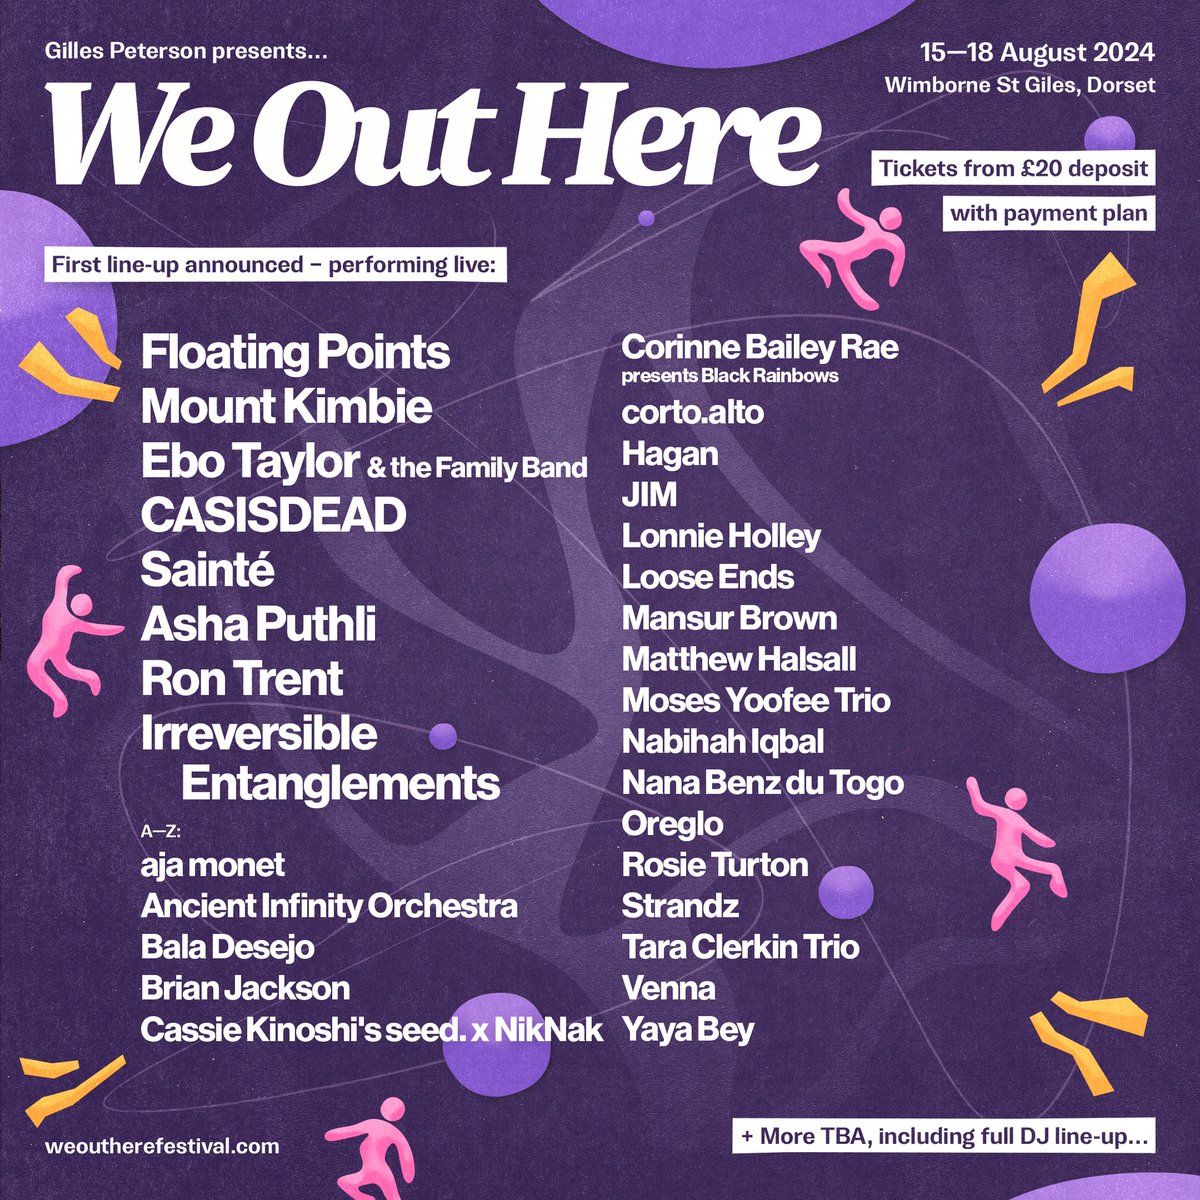 Gilles Peterson’s We Out Here (@weoutherefest) will return to Wimborne St. Giles next August with Floating Points, Ebo Taylor, Irreversible Entanglements, Brian Jackson, Cassie Kinoshi's seed., Nabihah Iqbal, Tara Clerkin Trio and many more in tow. fruitandgroovescollective.com/2023/11/30/we-…